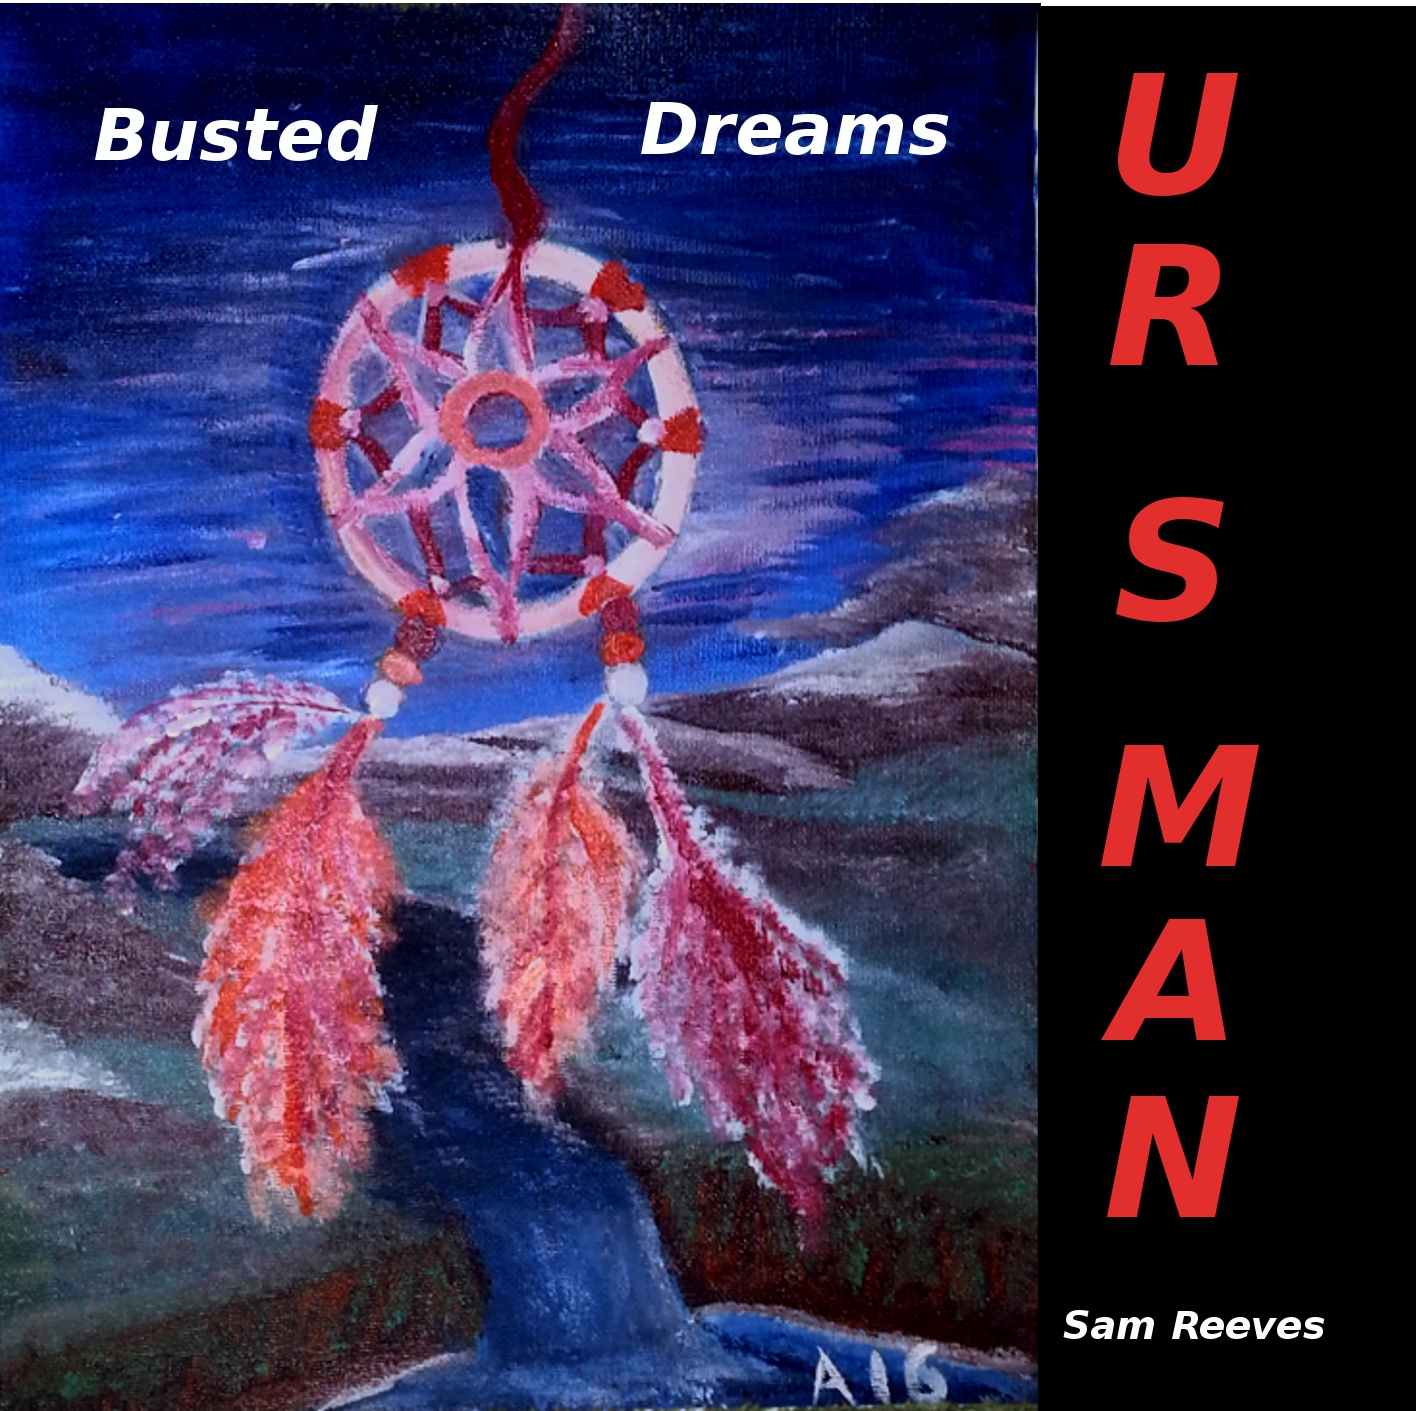 Busted Dreams CD by UR S MAN